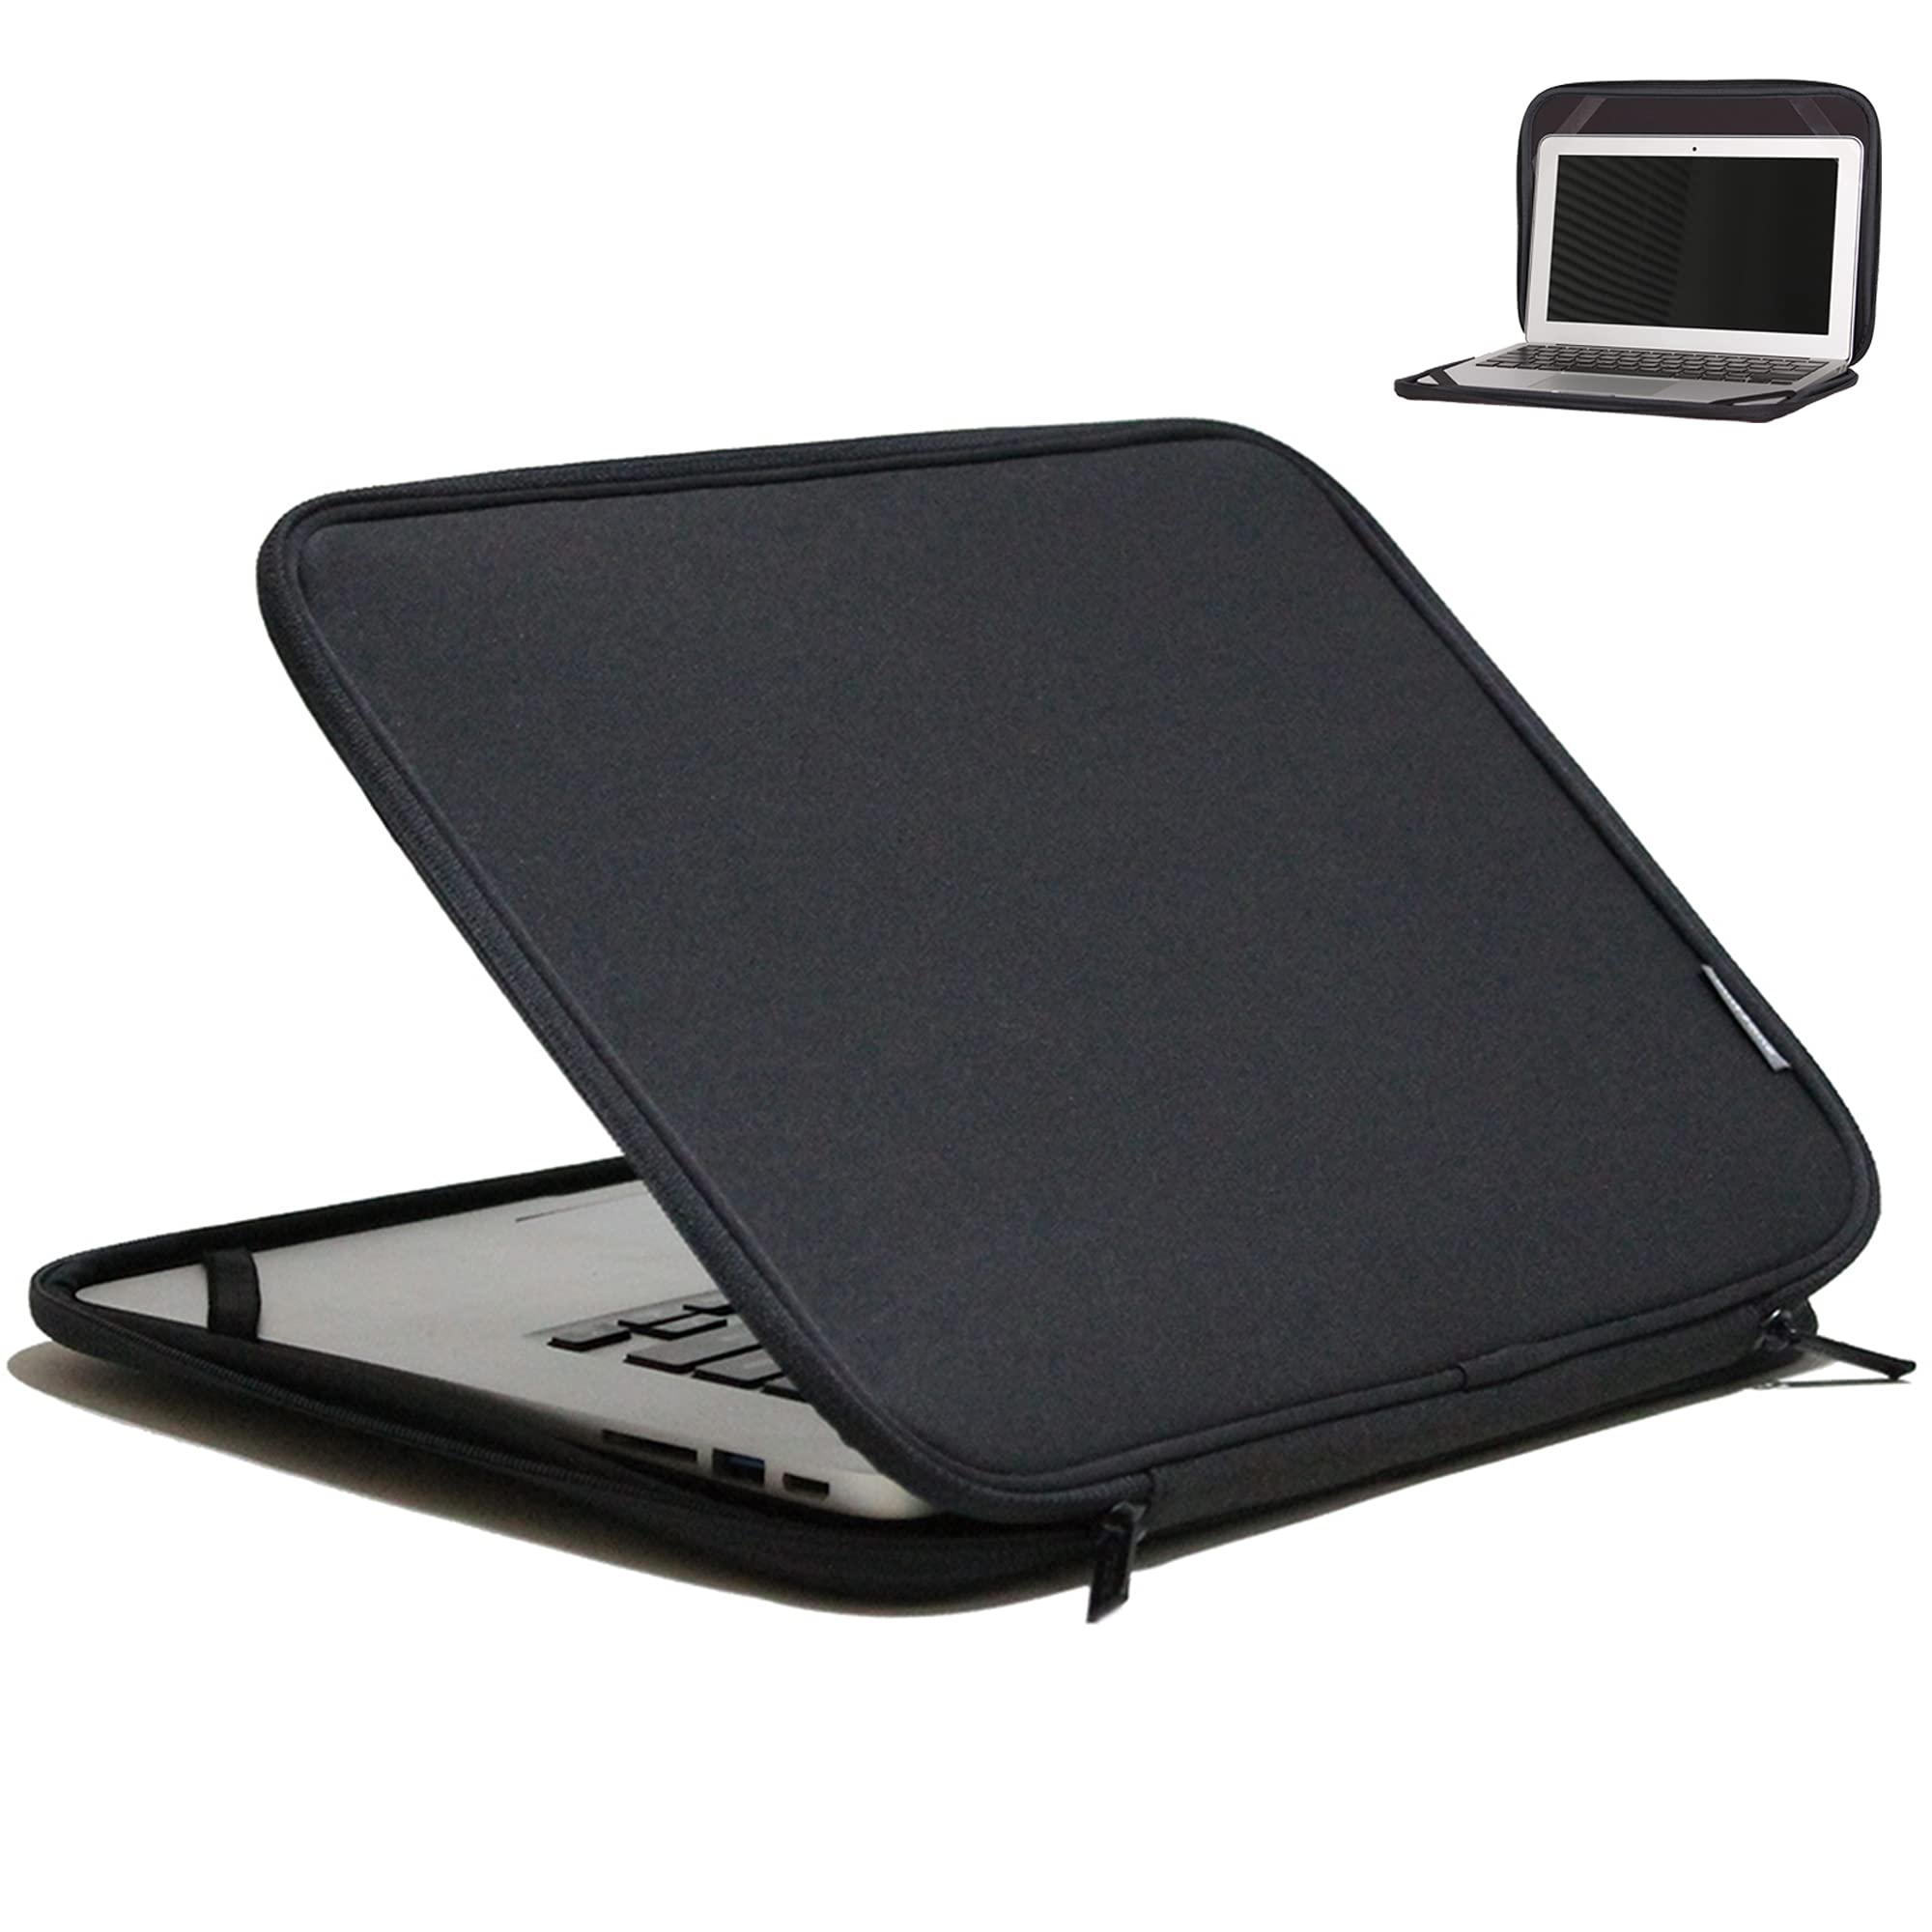 Laptop Sleeve Bag for Microsoft Surface Pro 7 12.3